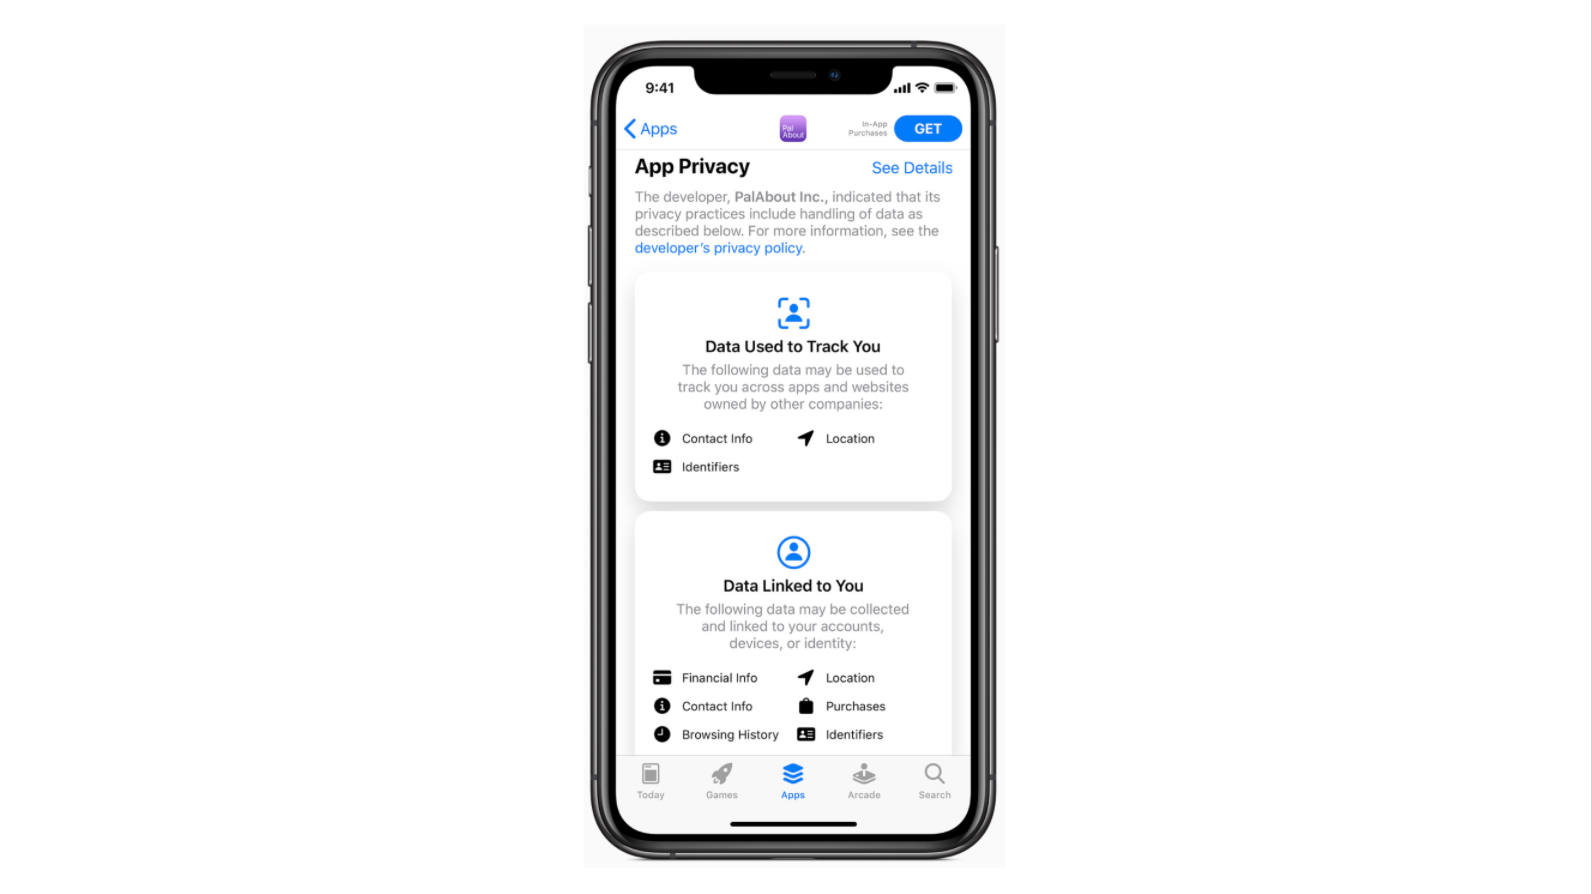 The new privacy section on the app store product page was unveiled by Apple during the last WWDC event